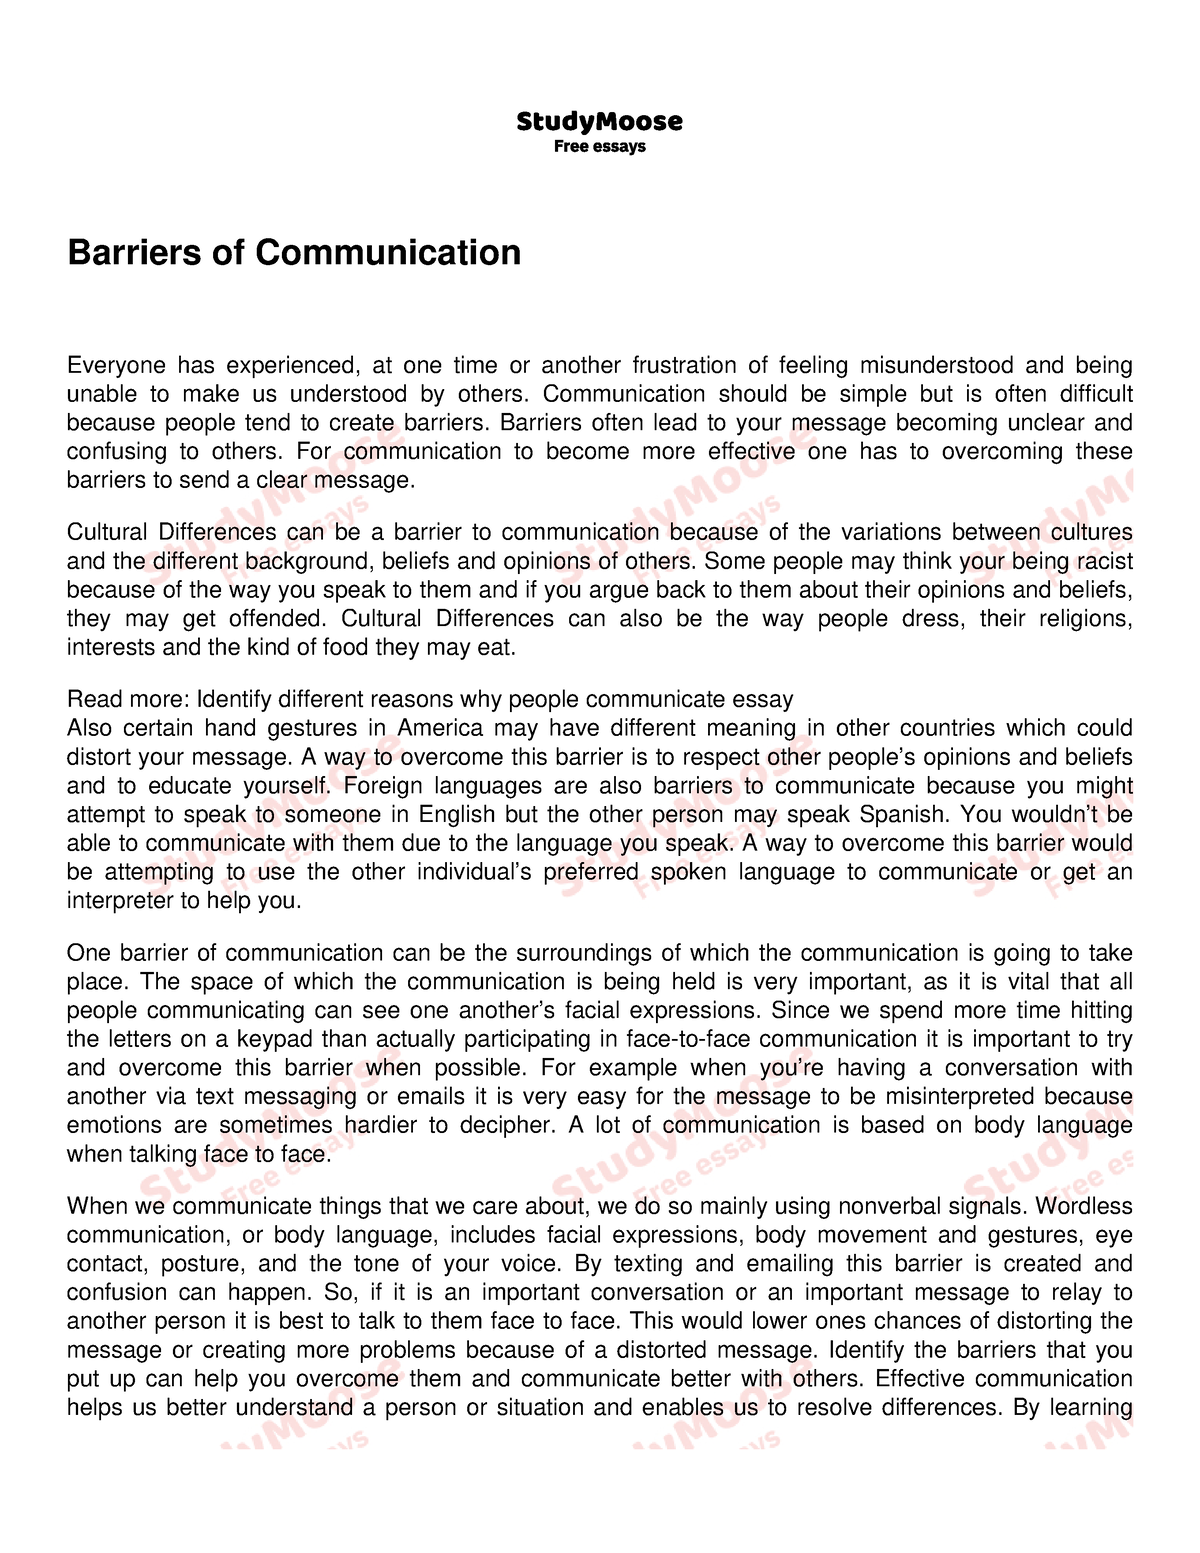 essay about makers not breakers of communication